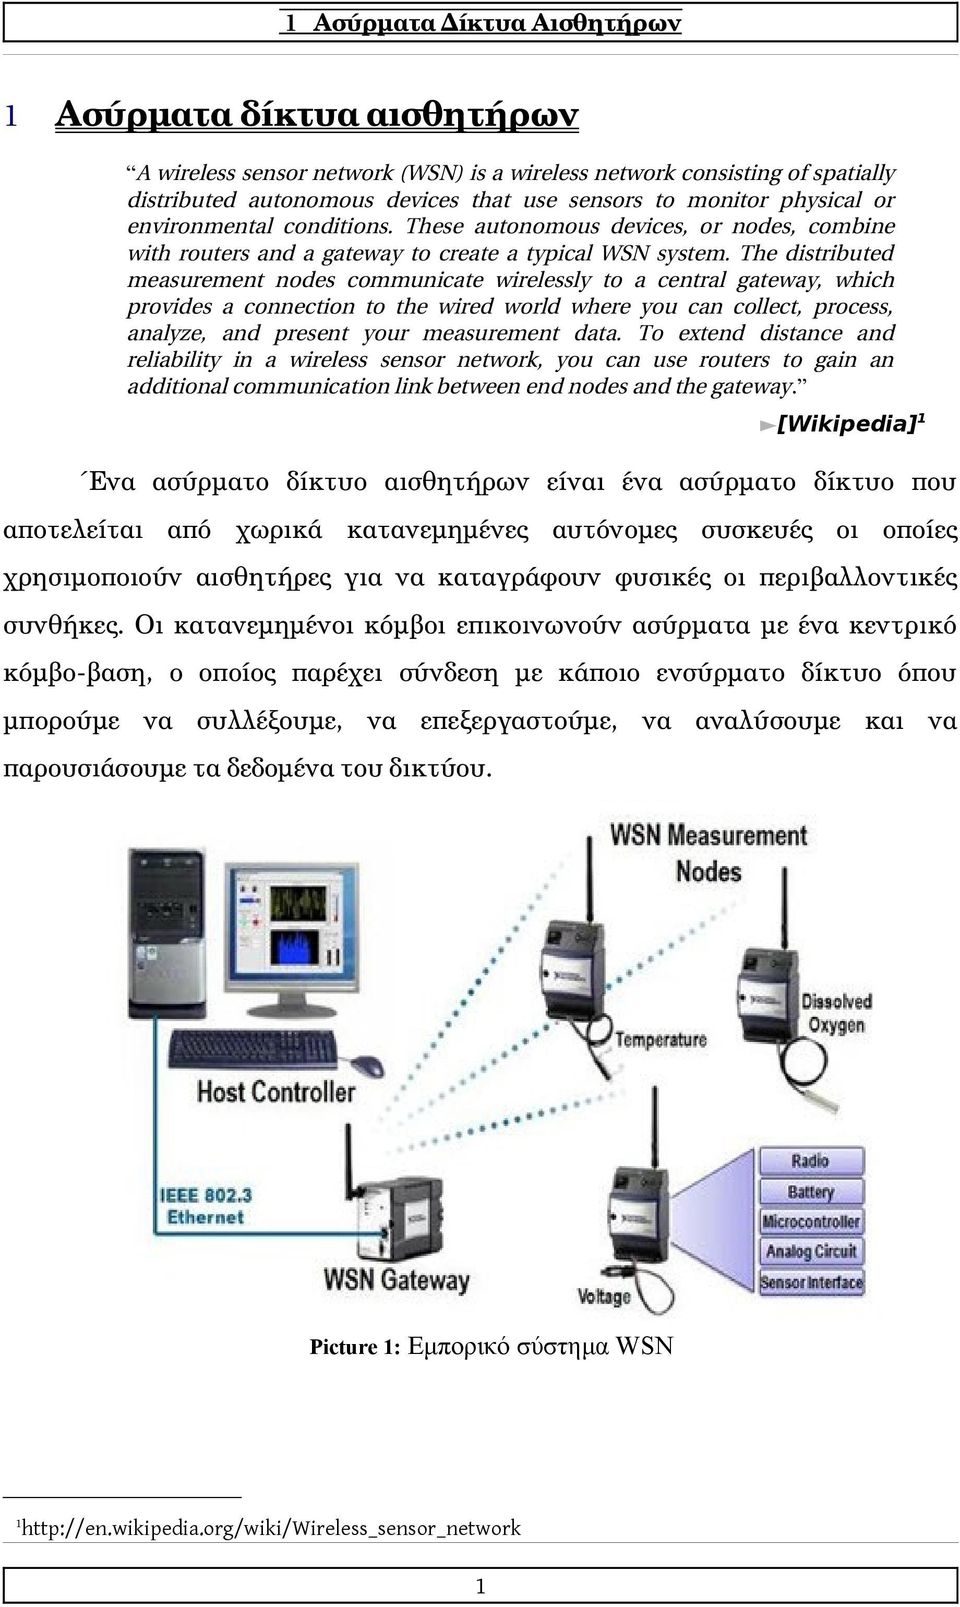 The distributed measurement nodes communicate wirelessly to a central gateway, which provides a connection to the wired world where you can collect, process, analyze, and present your measurement